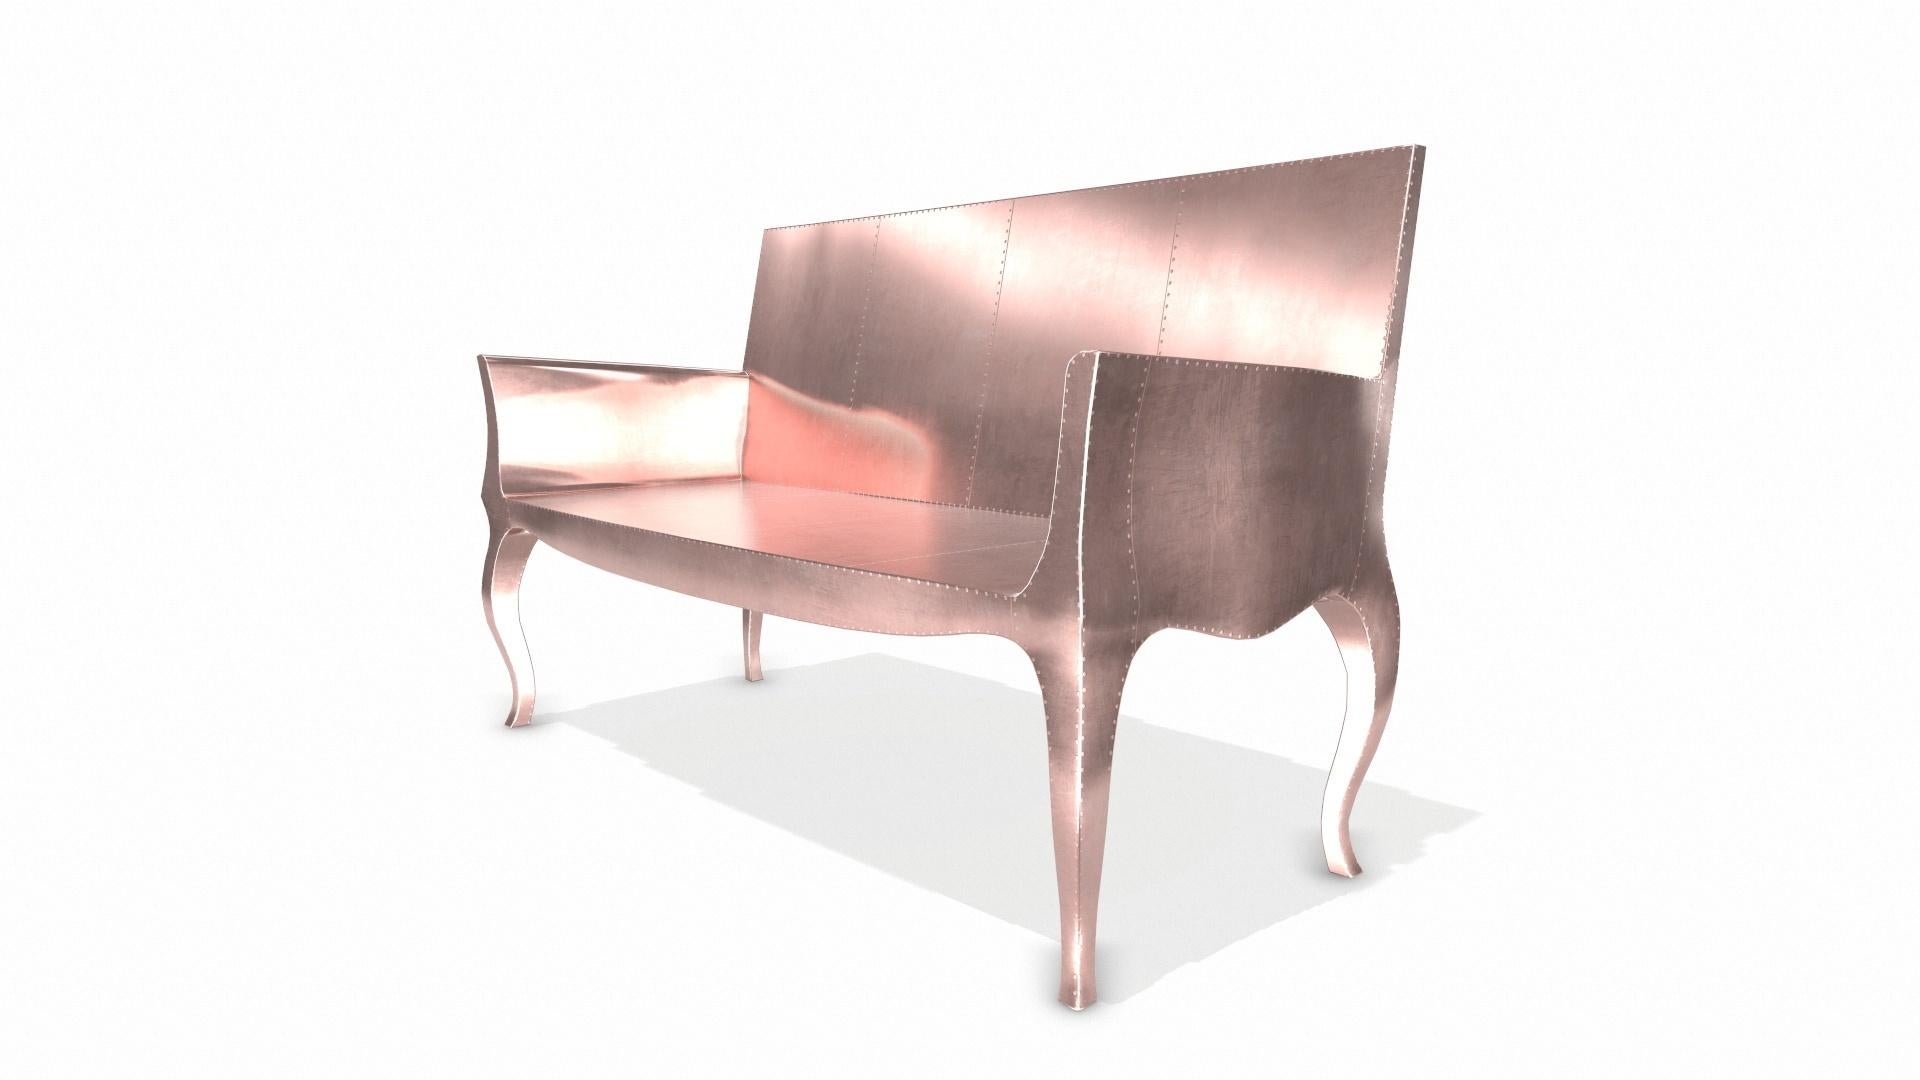 Hand-Crafted Louise Settee Art Deco Canapes in Smooth Copper by Paul Mathieu for S Odegard For Sale